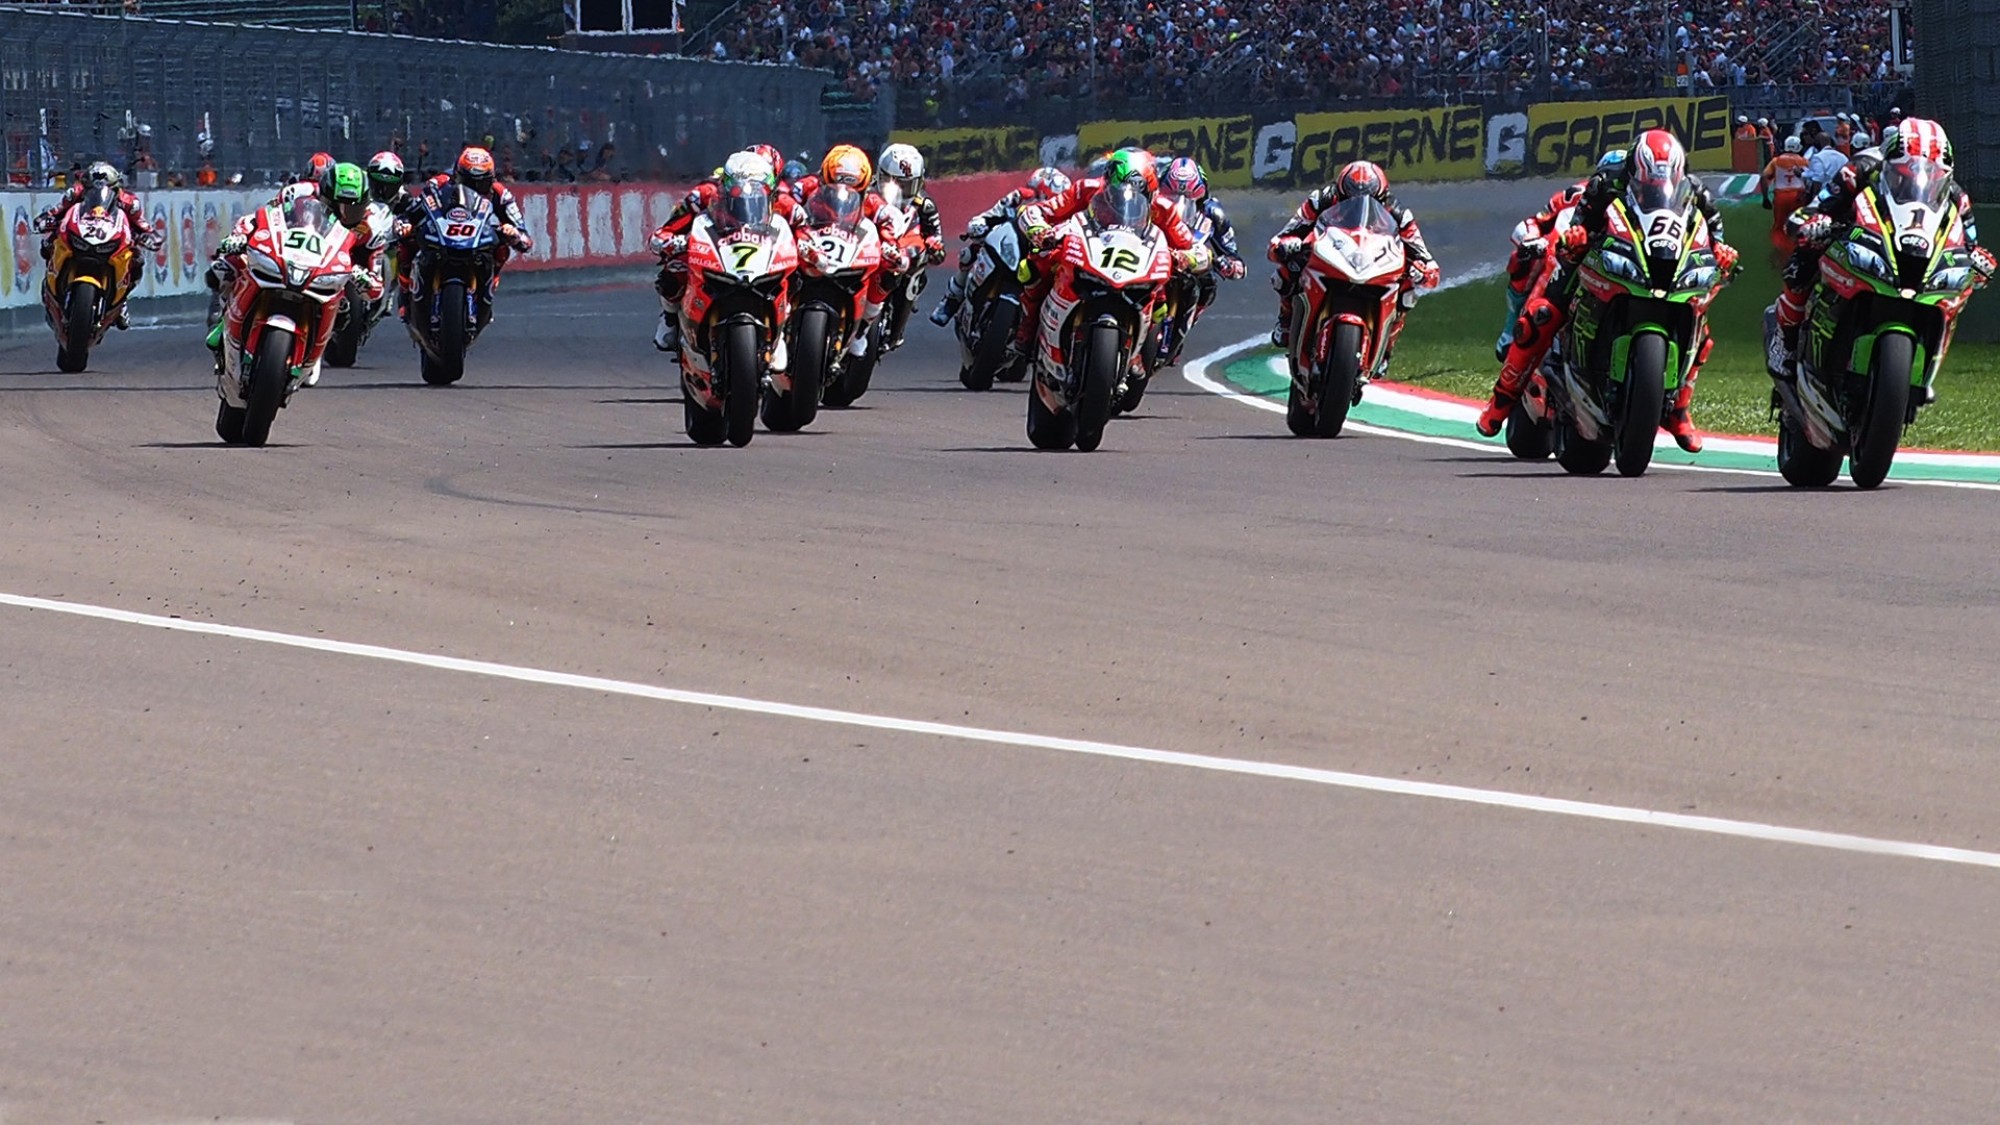 World Superbike beIN SPORTS Releases Its Broadcast Schedule For This Coming Weekends Races At Imola